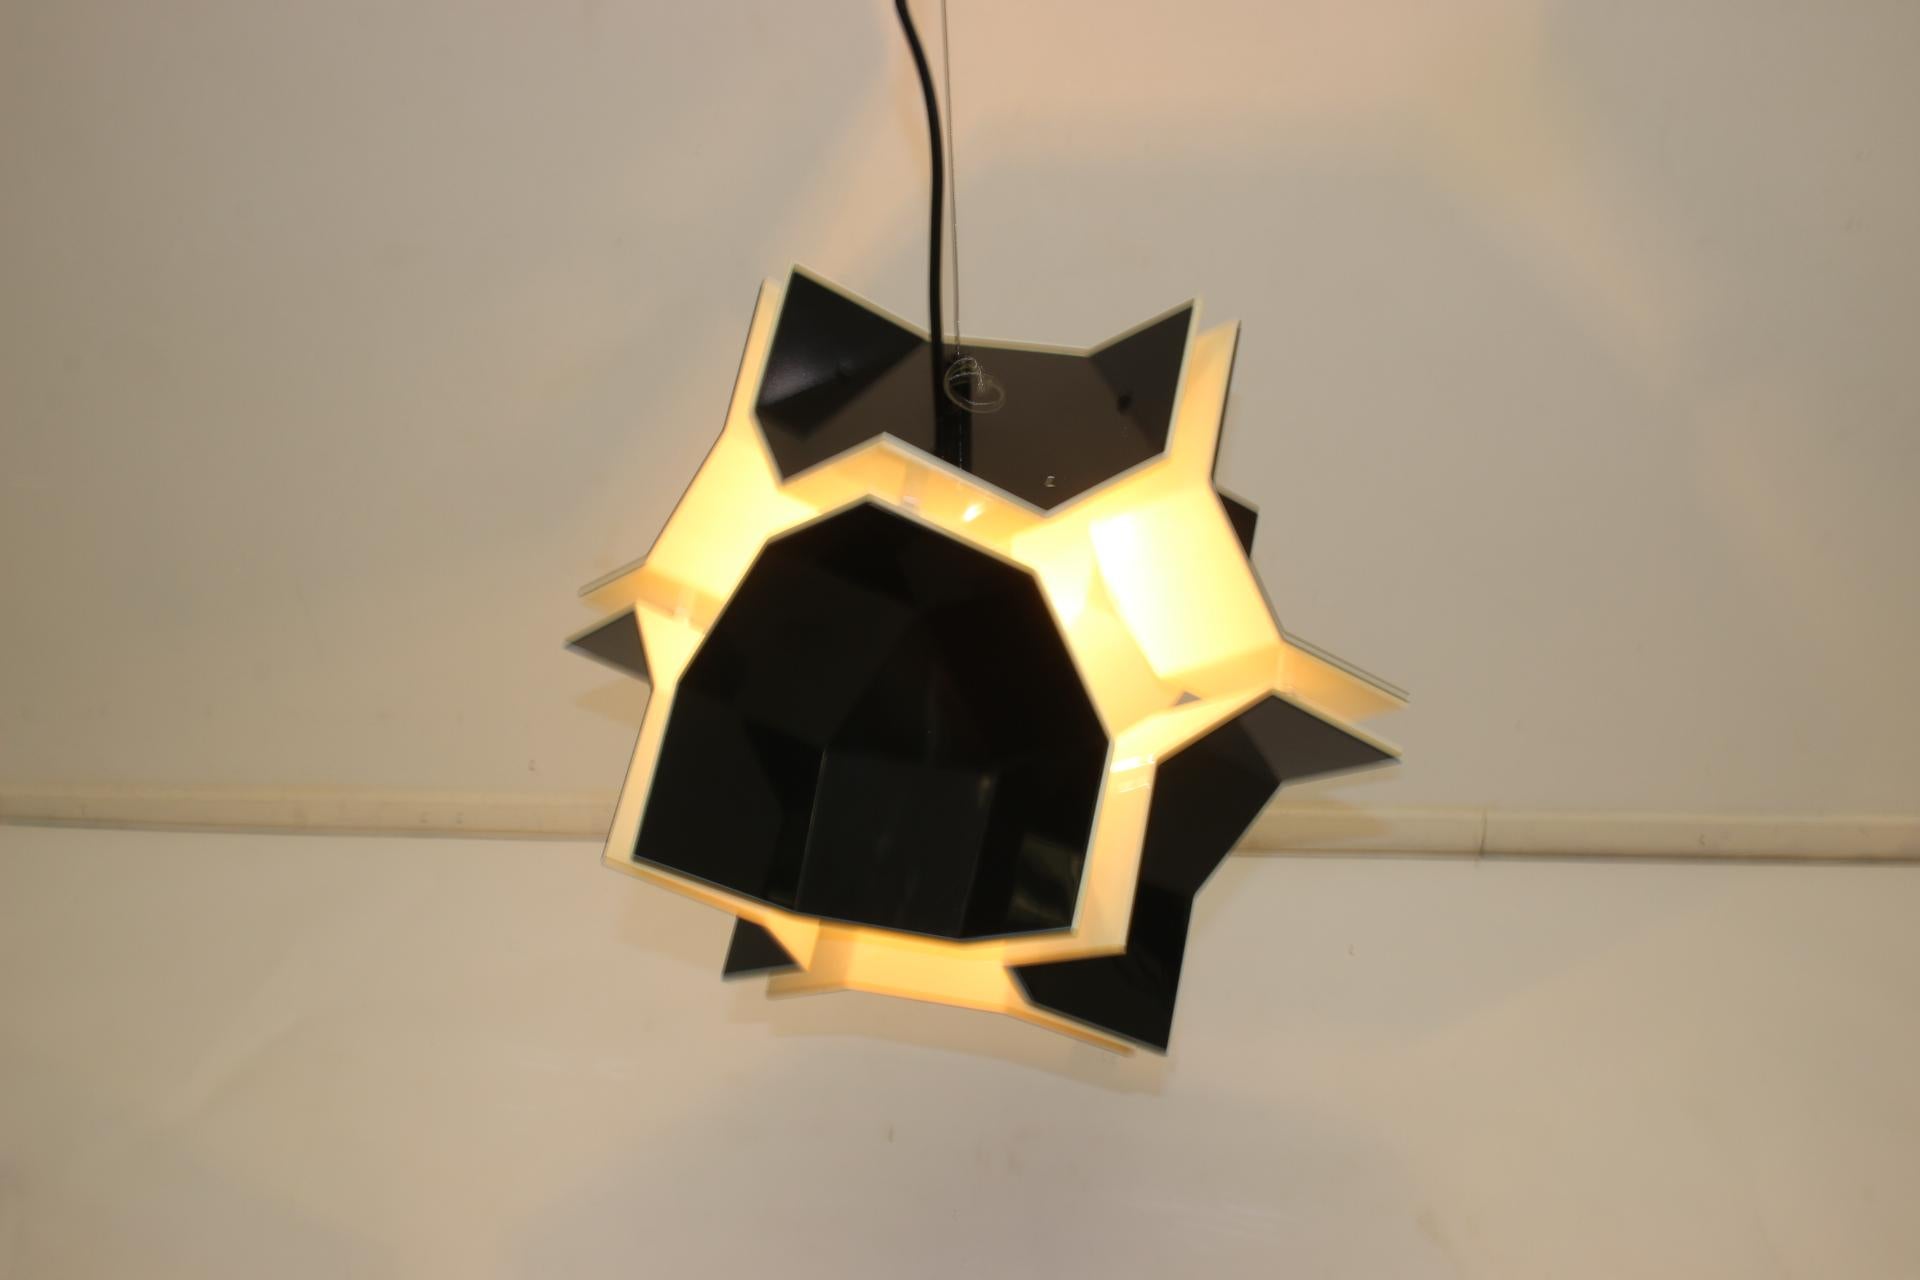 Space Age Acrylic Pendant Lamp by Christophe de Ryck for Dark, 1970s For Sale 13